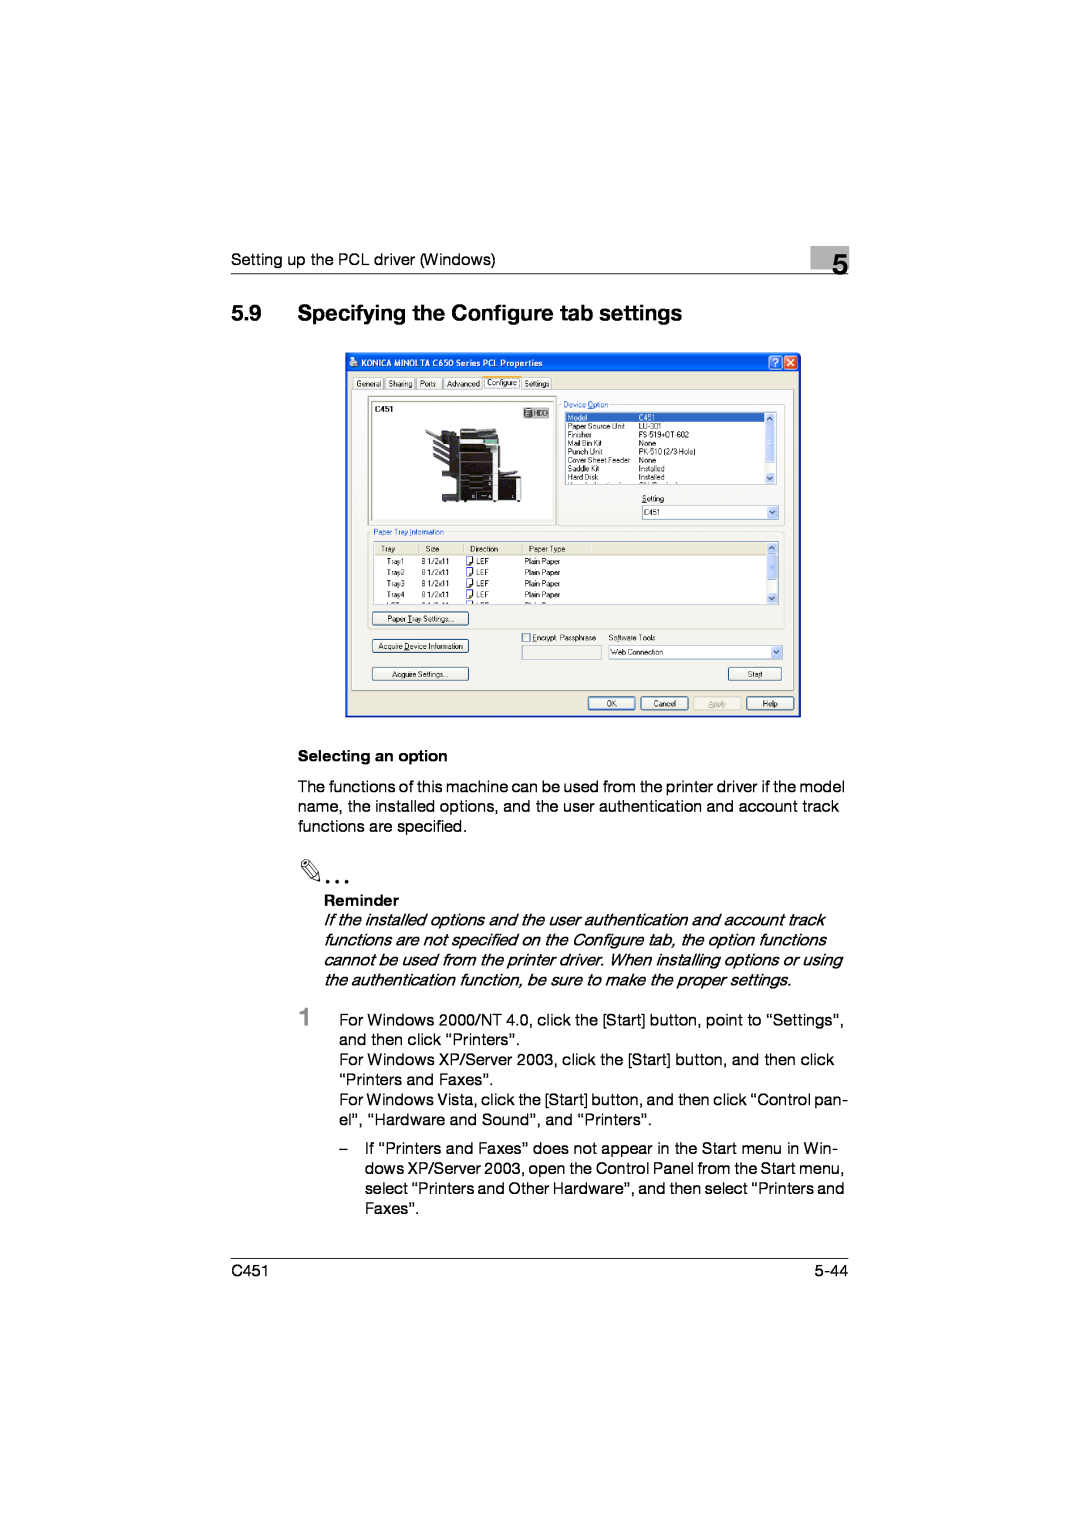 Konica Minolta C451 manual 5.9Specifying the Configure tab settings, Selecting an option, Reminder 